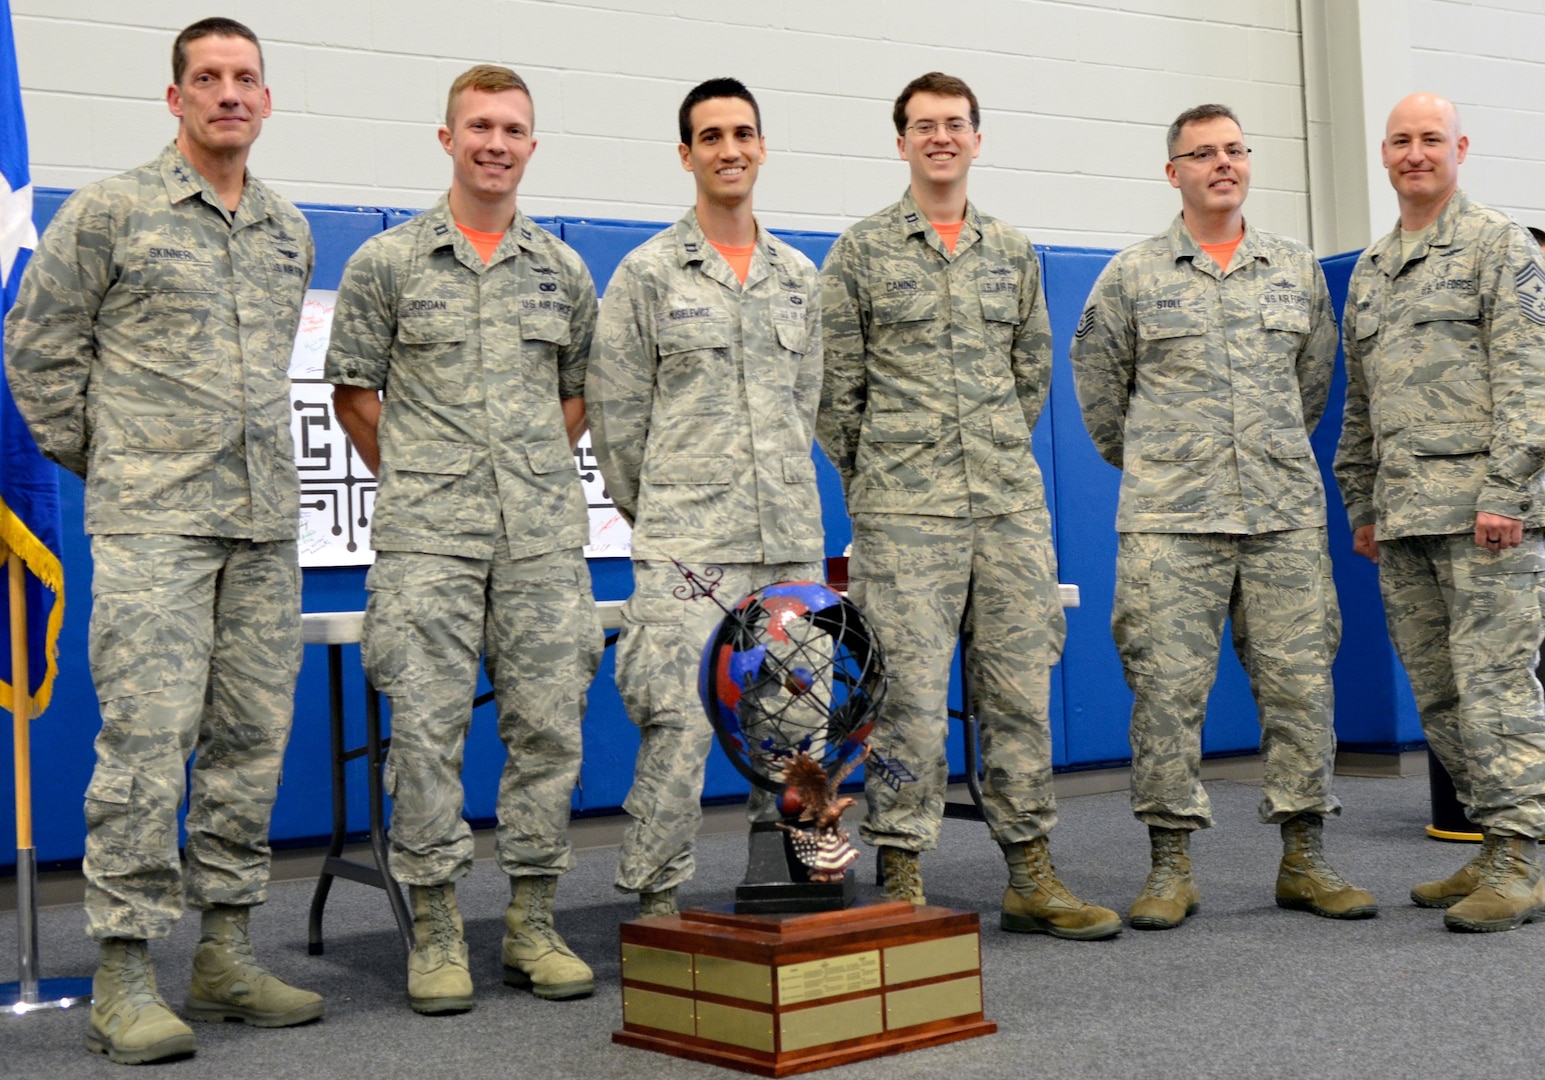 Maj. Gen. Robert Skinner, 24th Air Force commander, and Chief Master Sgt. David Klink, 24th AF command chief, pose for a photo with the 24th AF Cyber Competition unit team winner in San Antonio, June 7, 2019. The team, from the 390th Cyberspace Operations Squadron, included Capts. Paul Jordan, David Musielewicz and Anthony Canino and Tech. Sgt. Zachary Stoll.